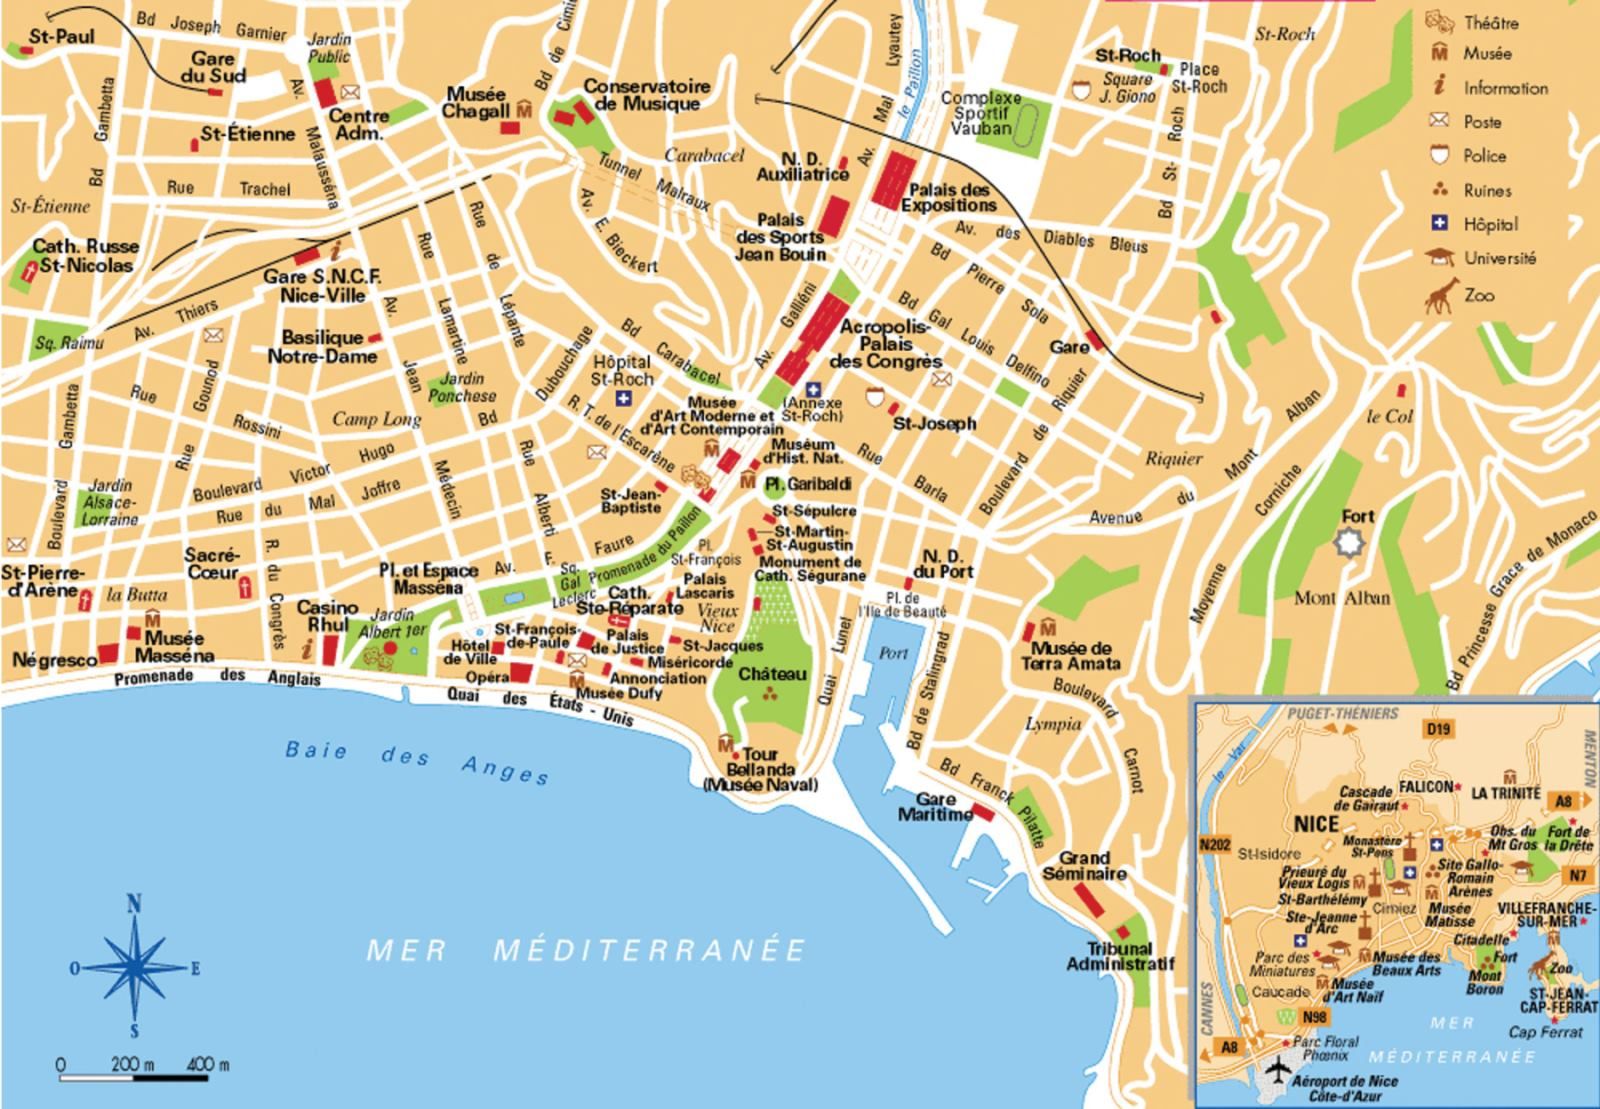 /assets/contentimages/Cannes__map.jpg